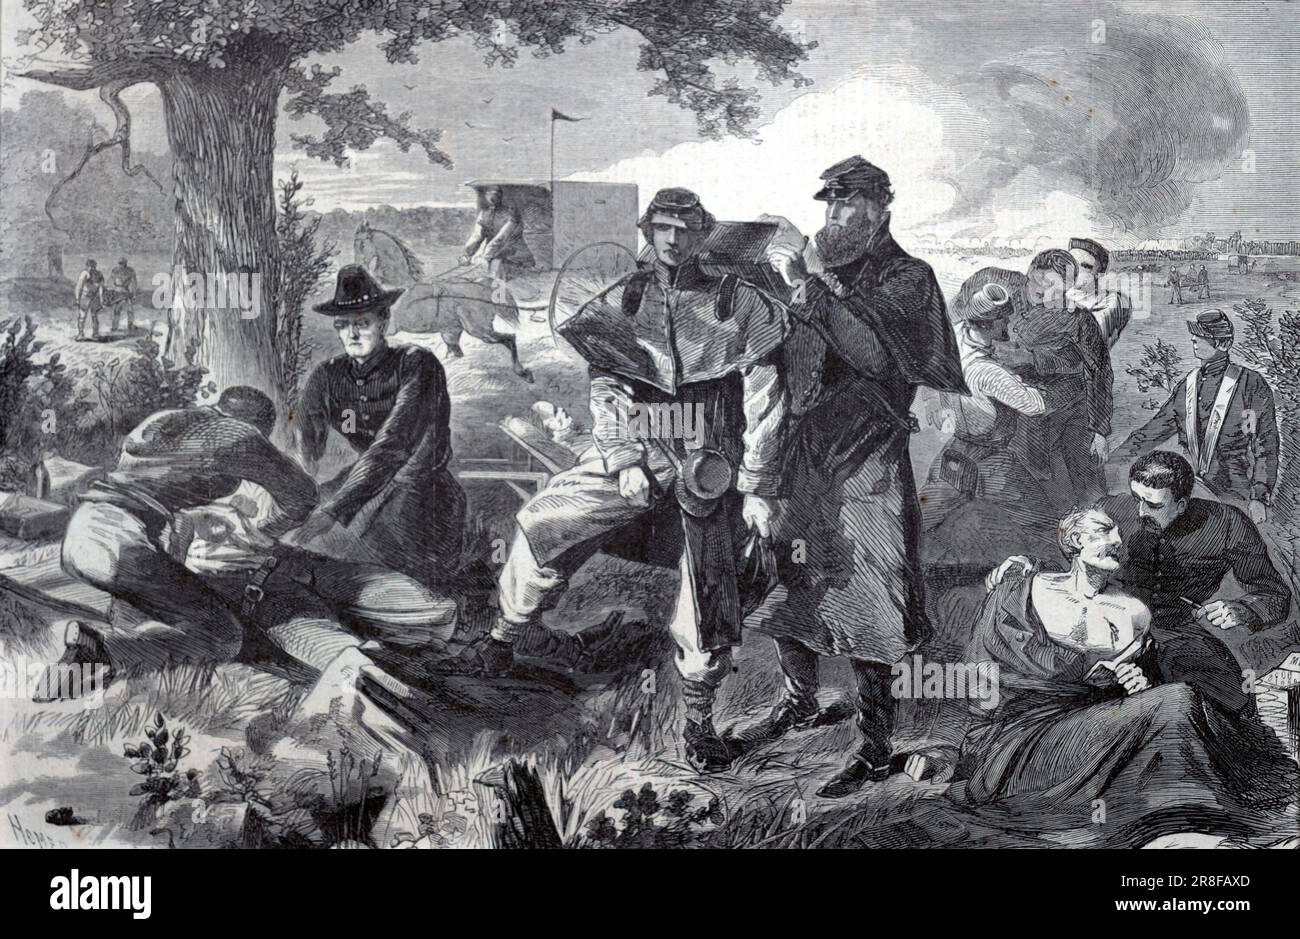 The Surgeon at Work at the Rear During an Engagement, from Harper's Weekly, July 12, 1862 1862 by Winslow Homer, born Boston, MA 1836-died Prout's Neck, ME 1910 Stock Photo